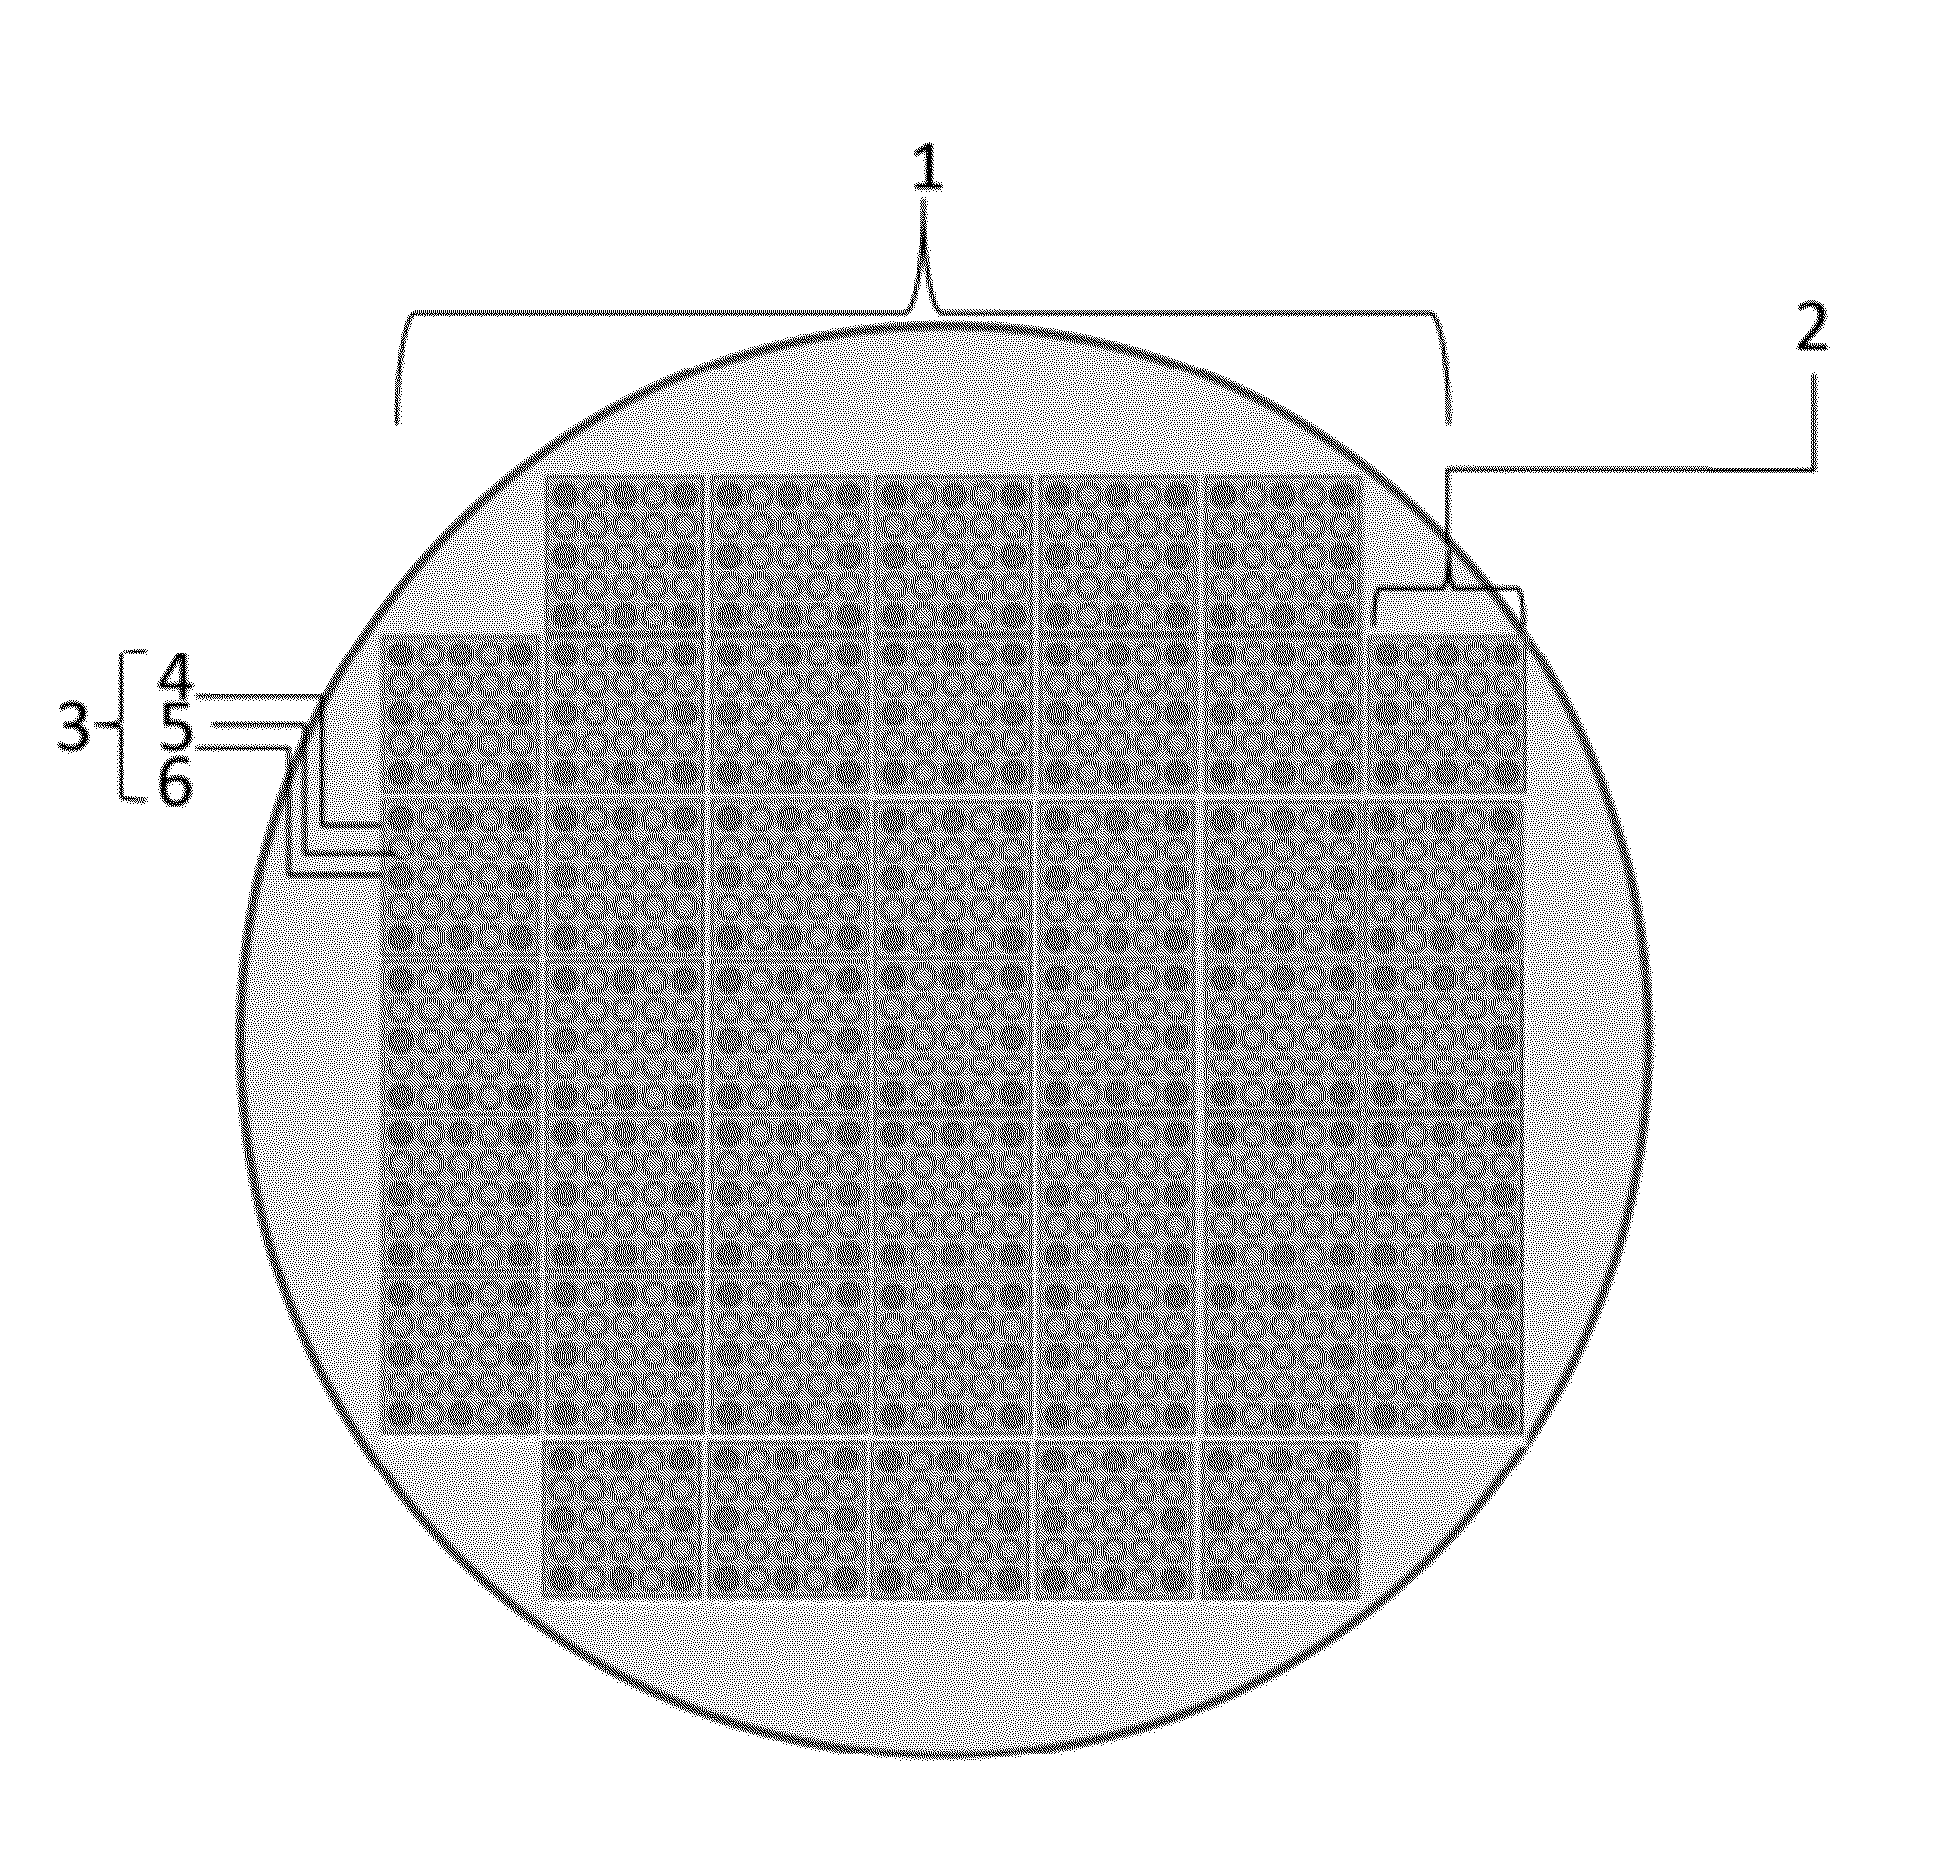 Fabrication process for mastering imaging lens arrays